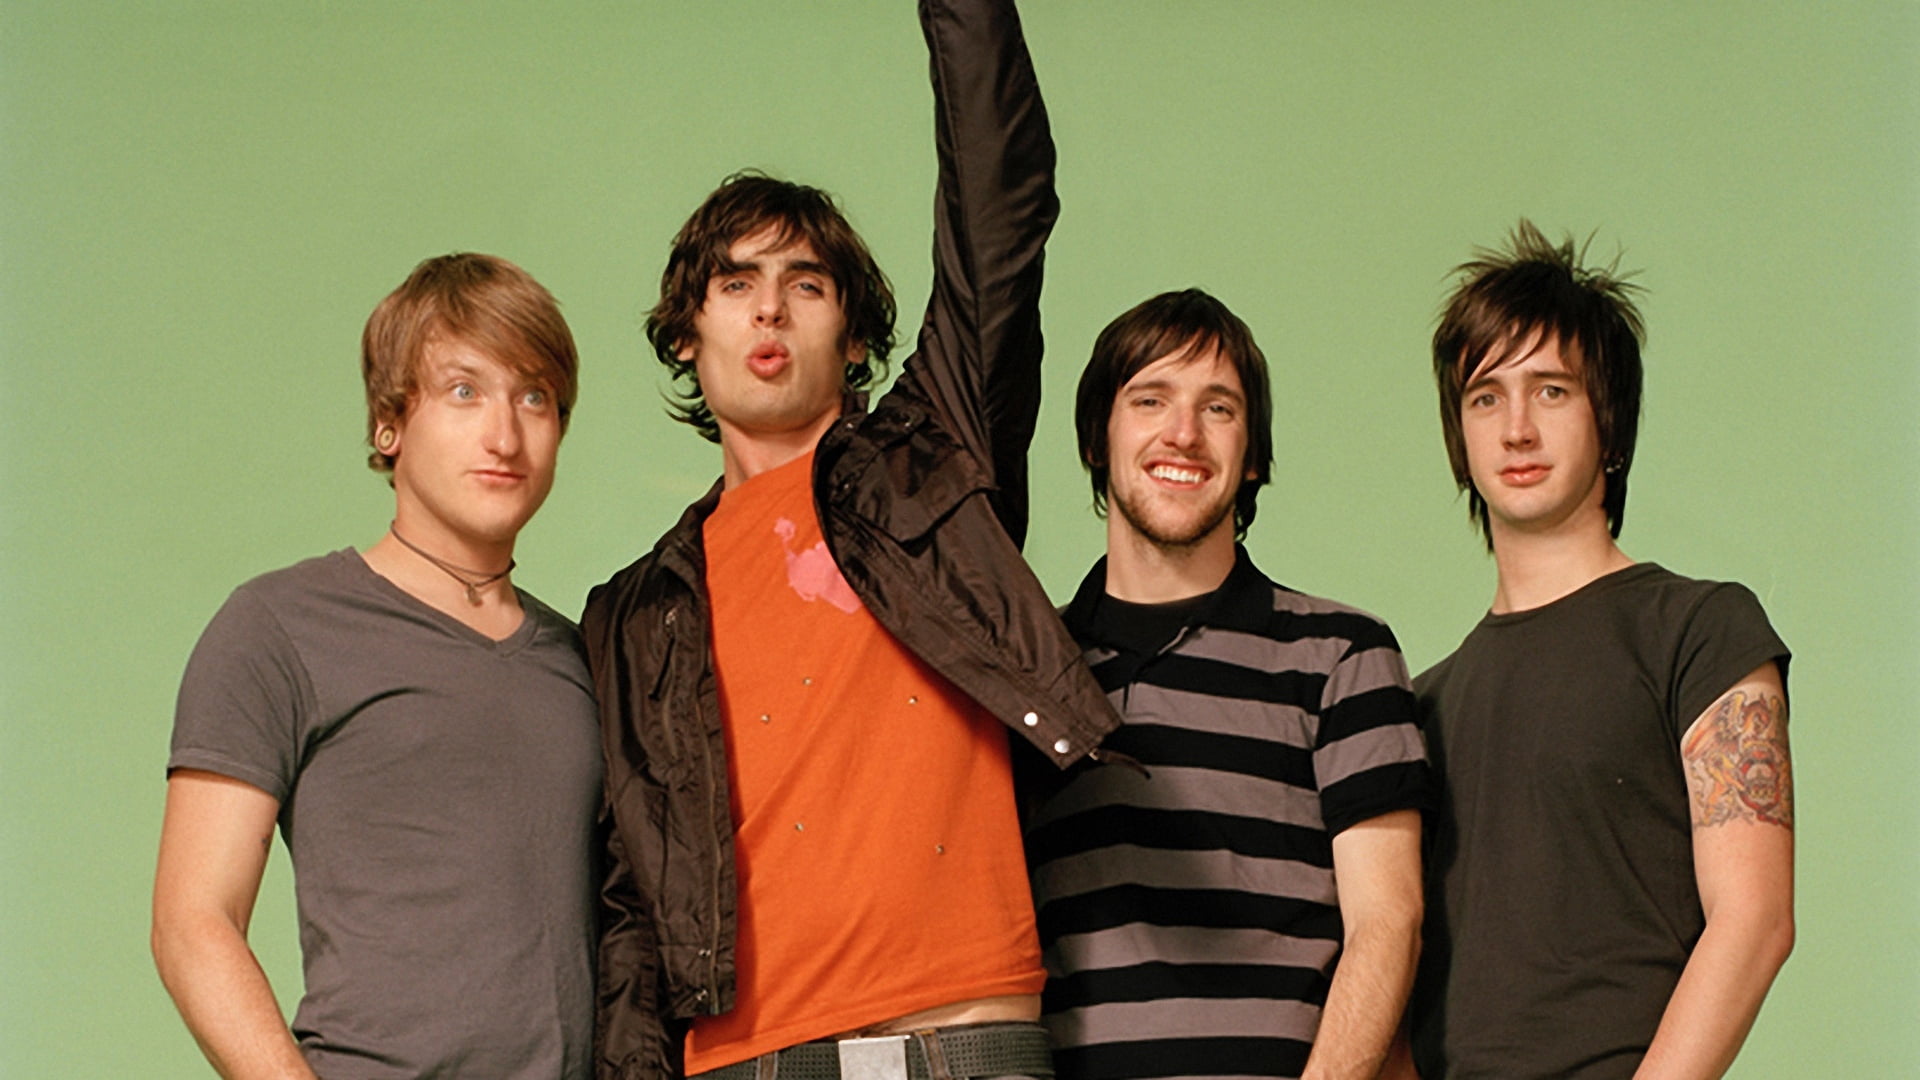 The All-American Rejects, tattoo, haircut, clothes, smile, people